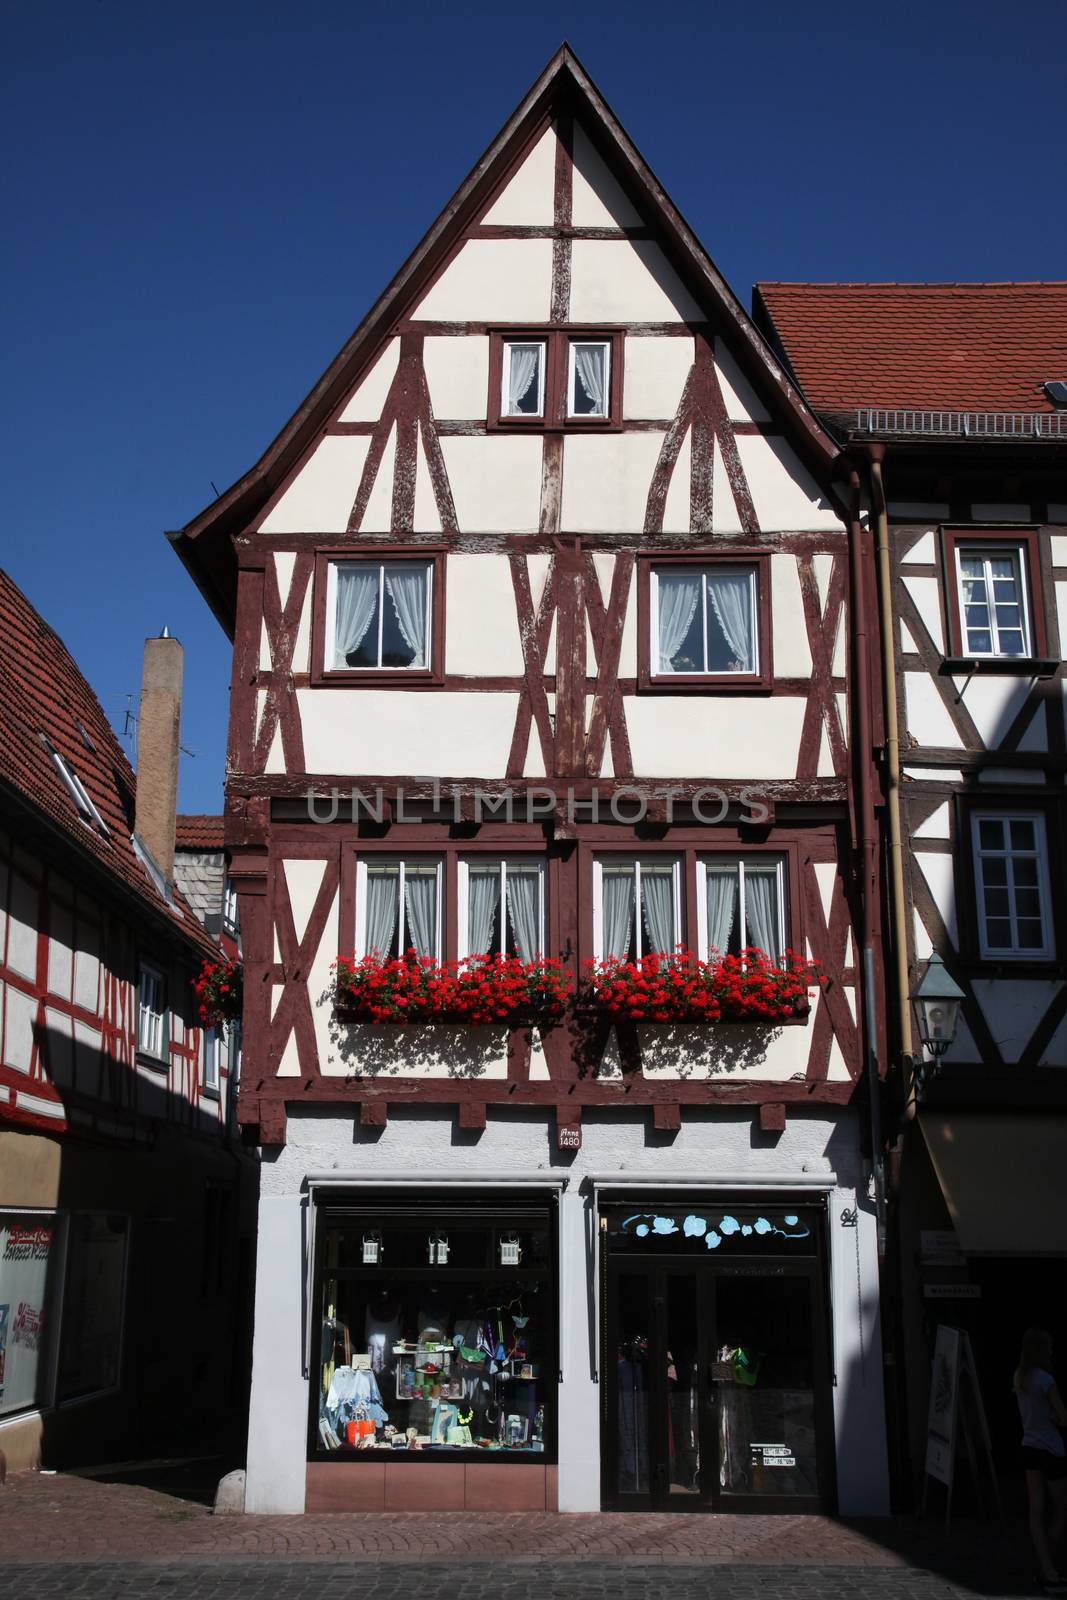 Half-timbered old houses in Miltenberg, Germany by atlas